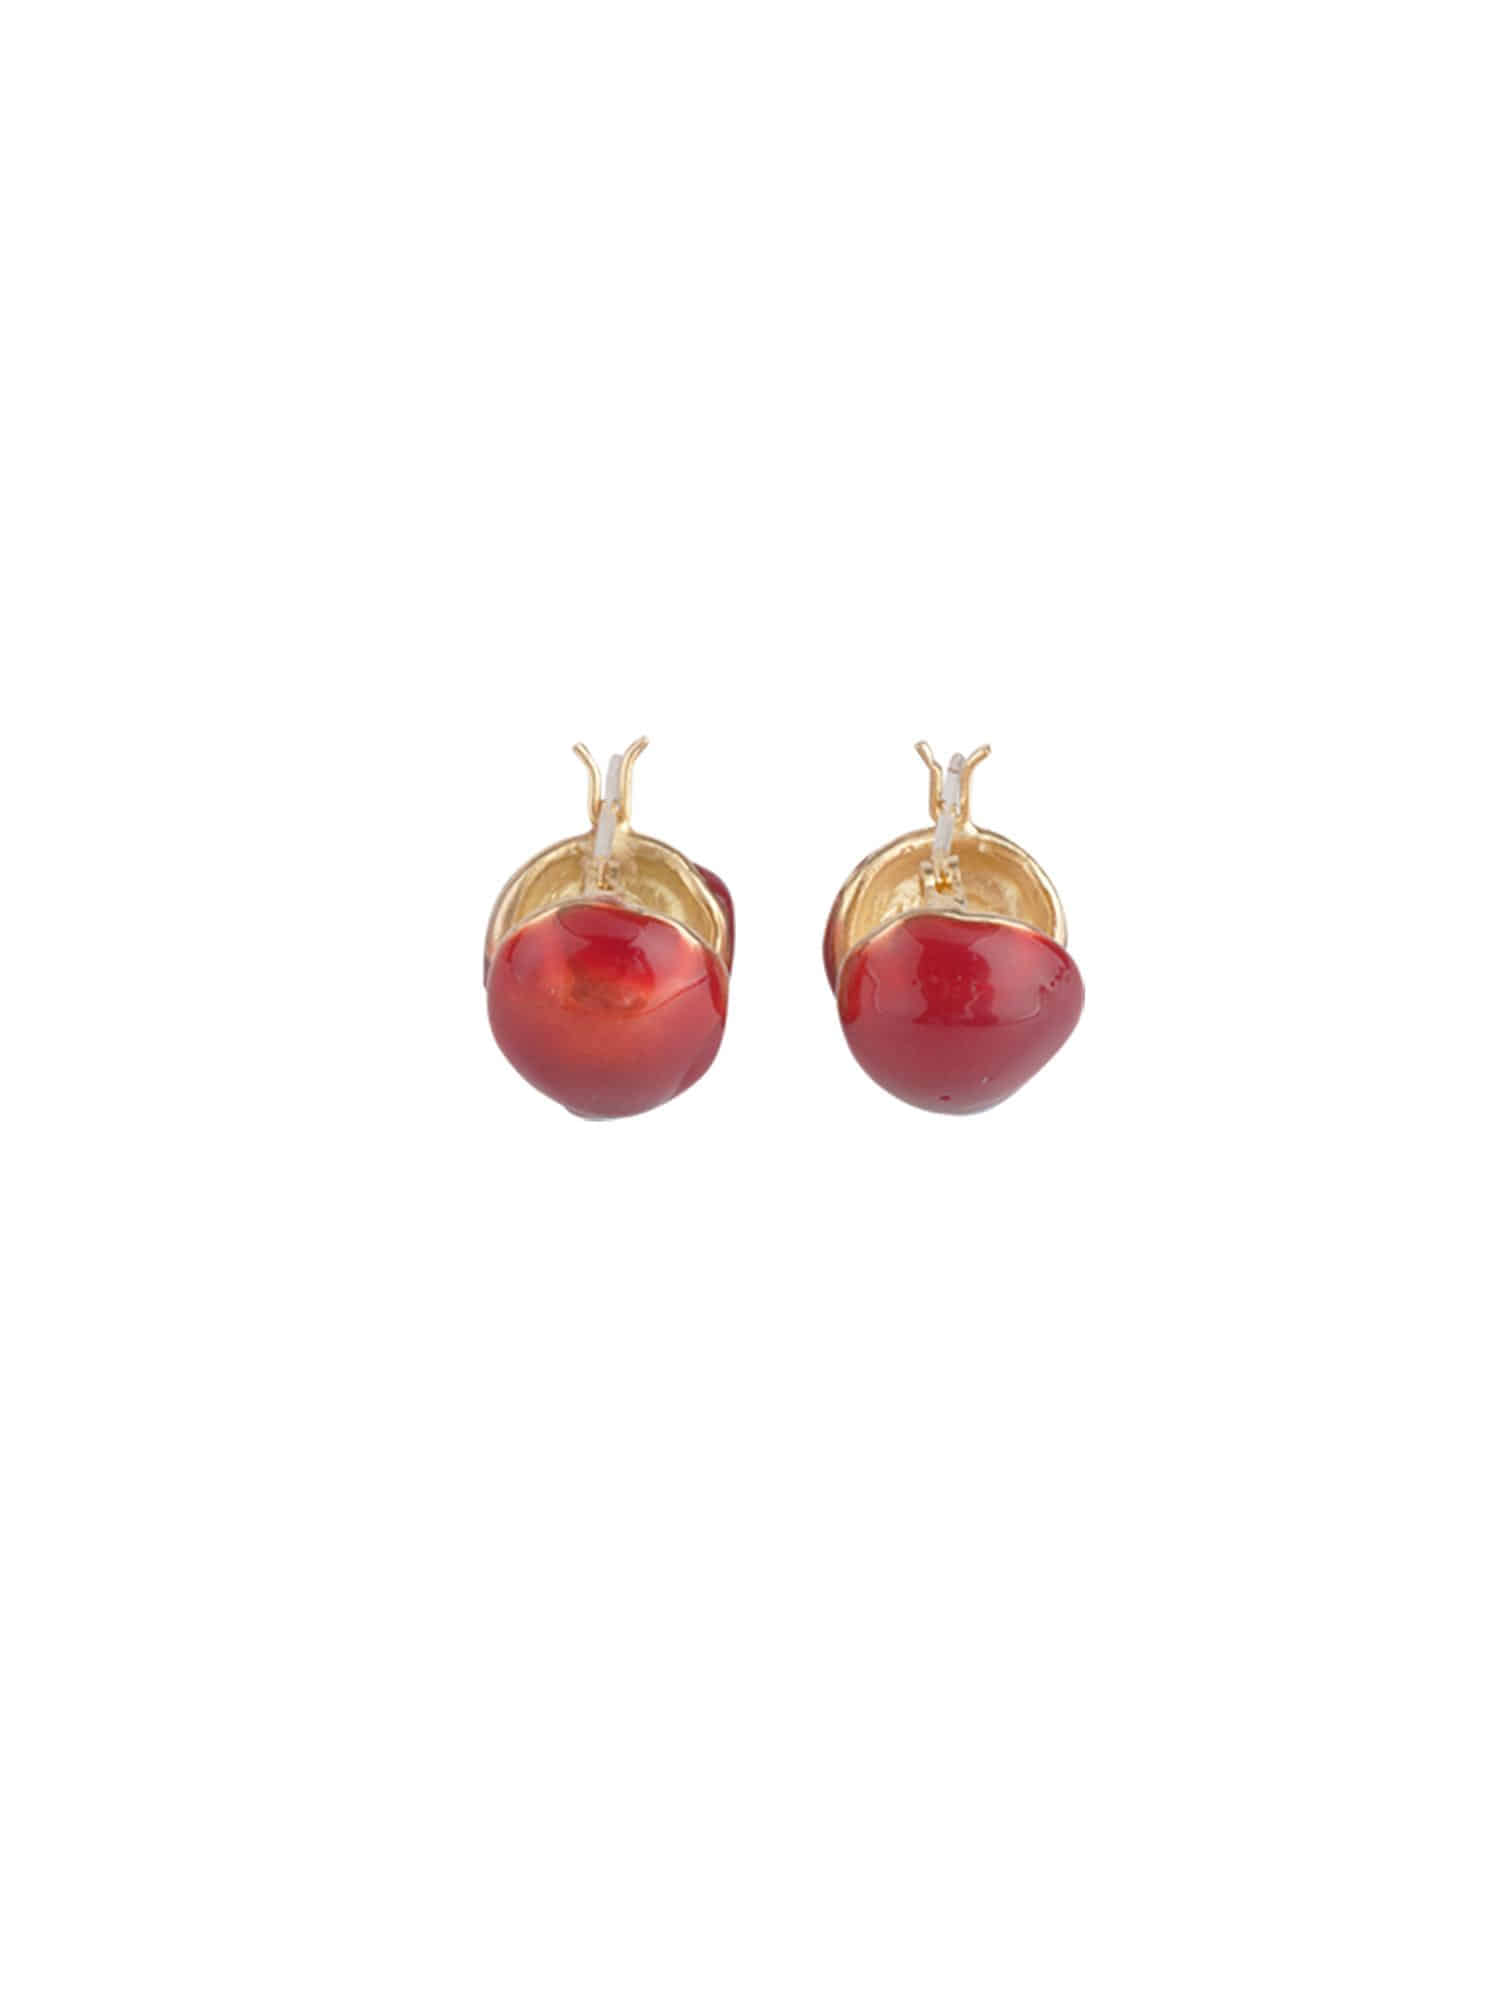 Youth ball Earrings #1 - Color